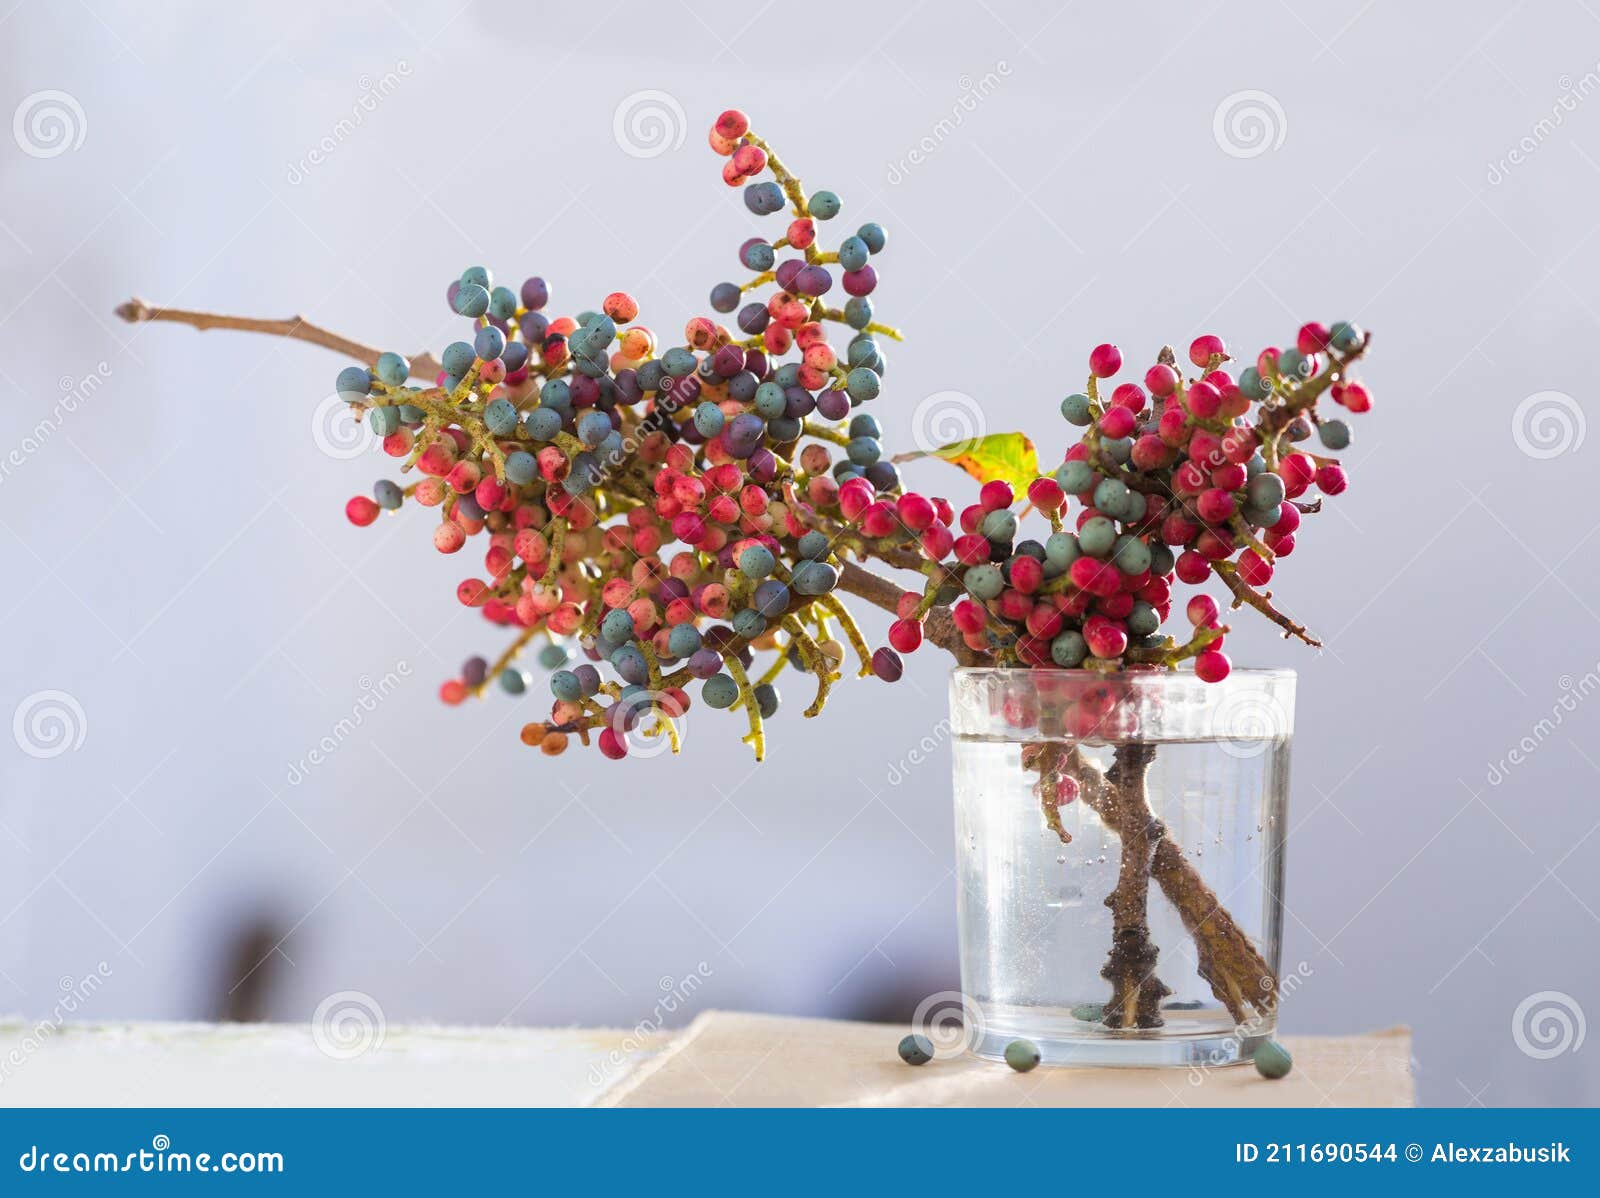 branch of persian turpentine tree with ripe fruits in glass with water